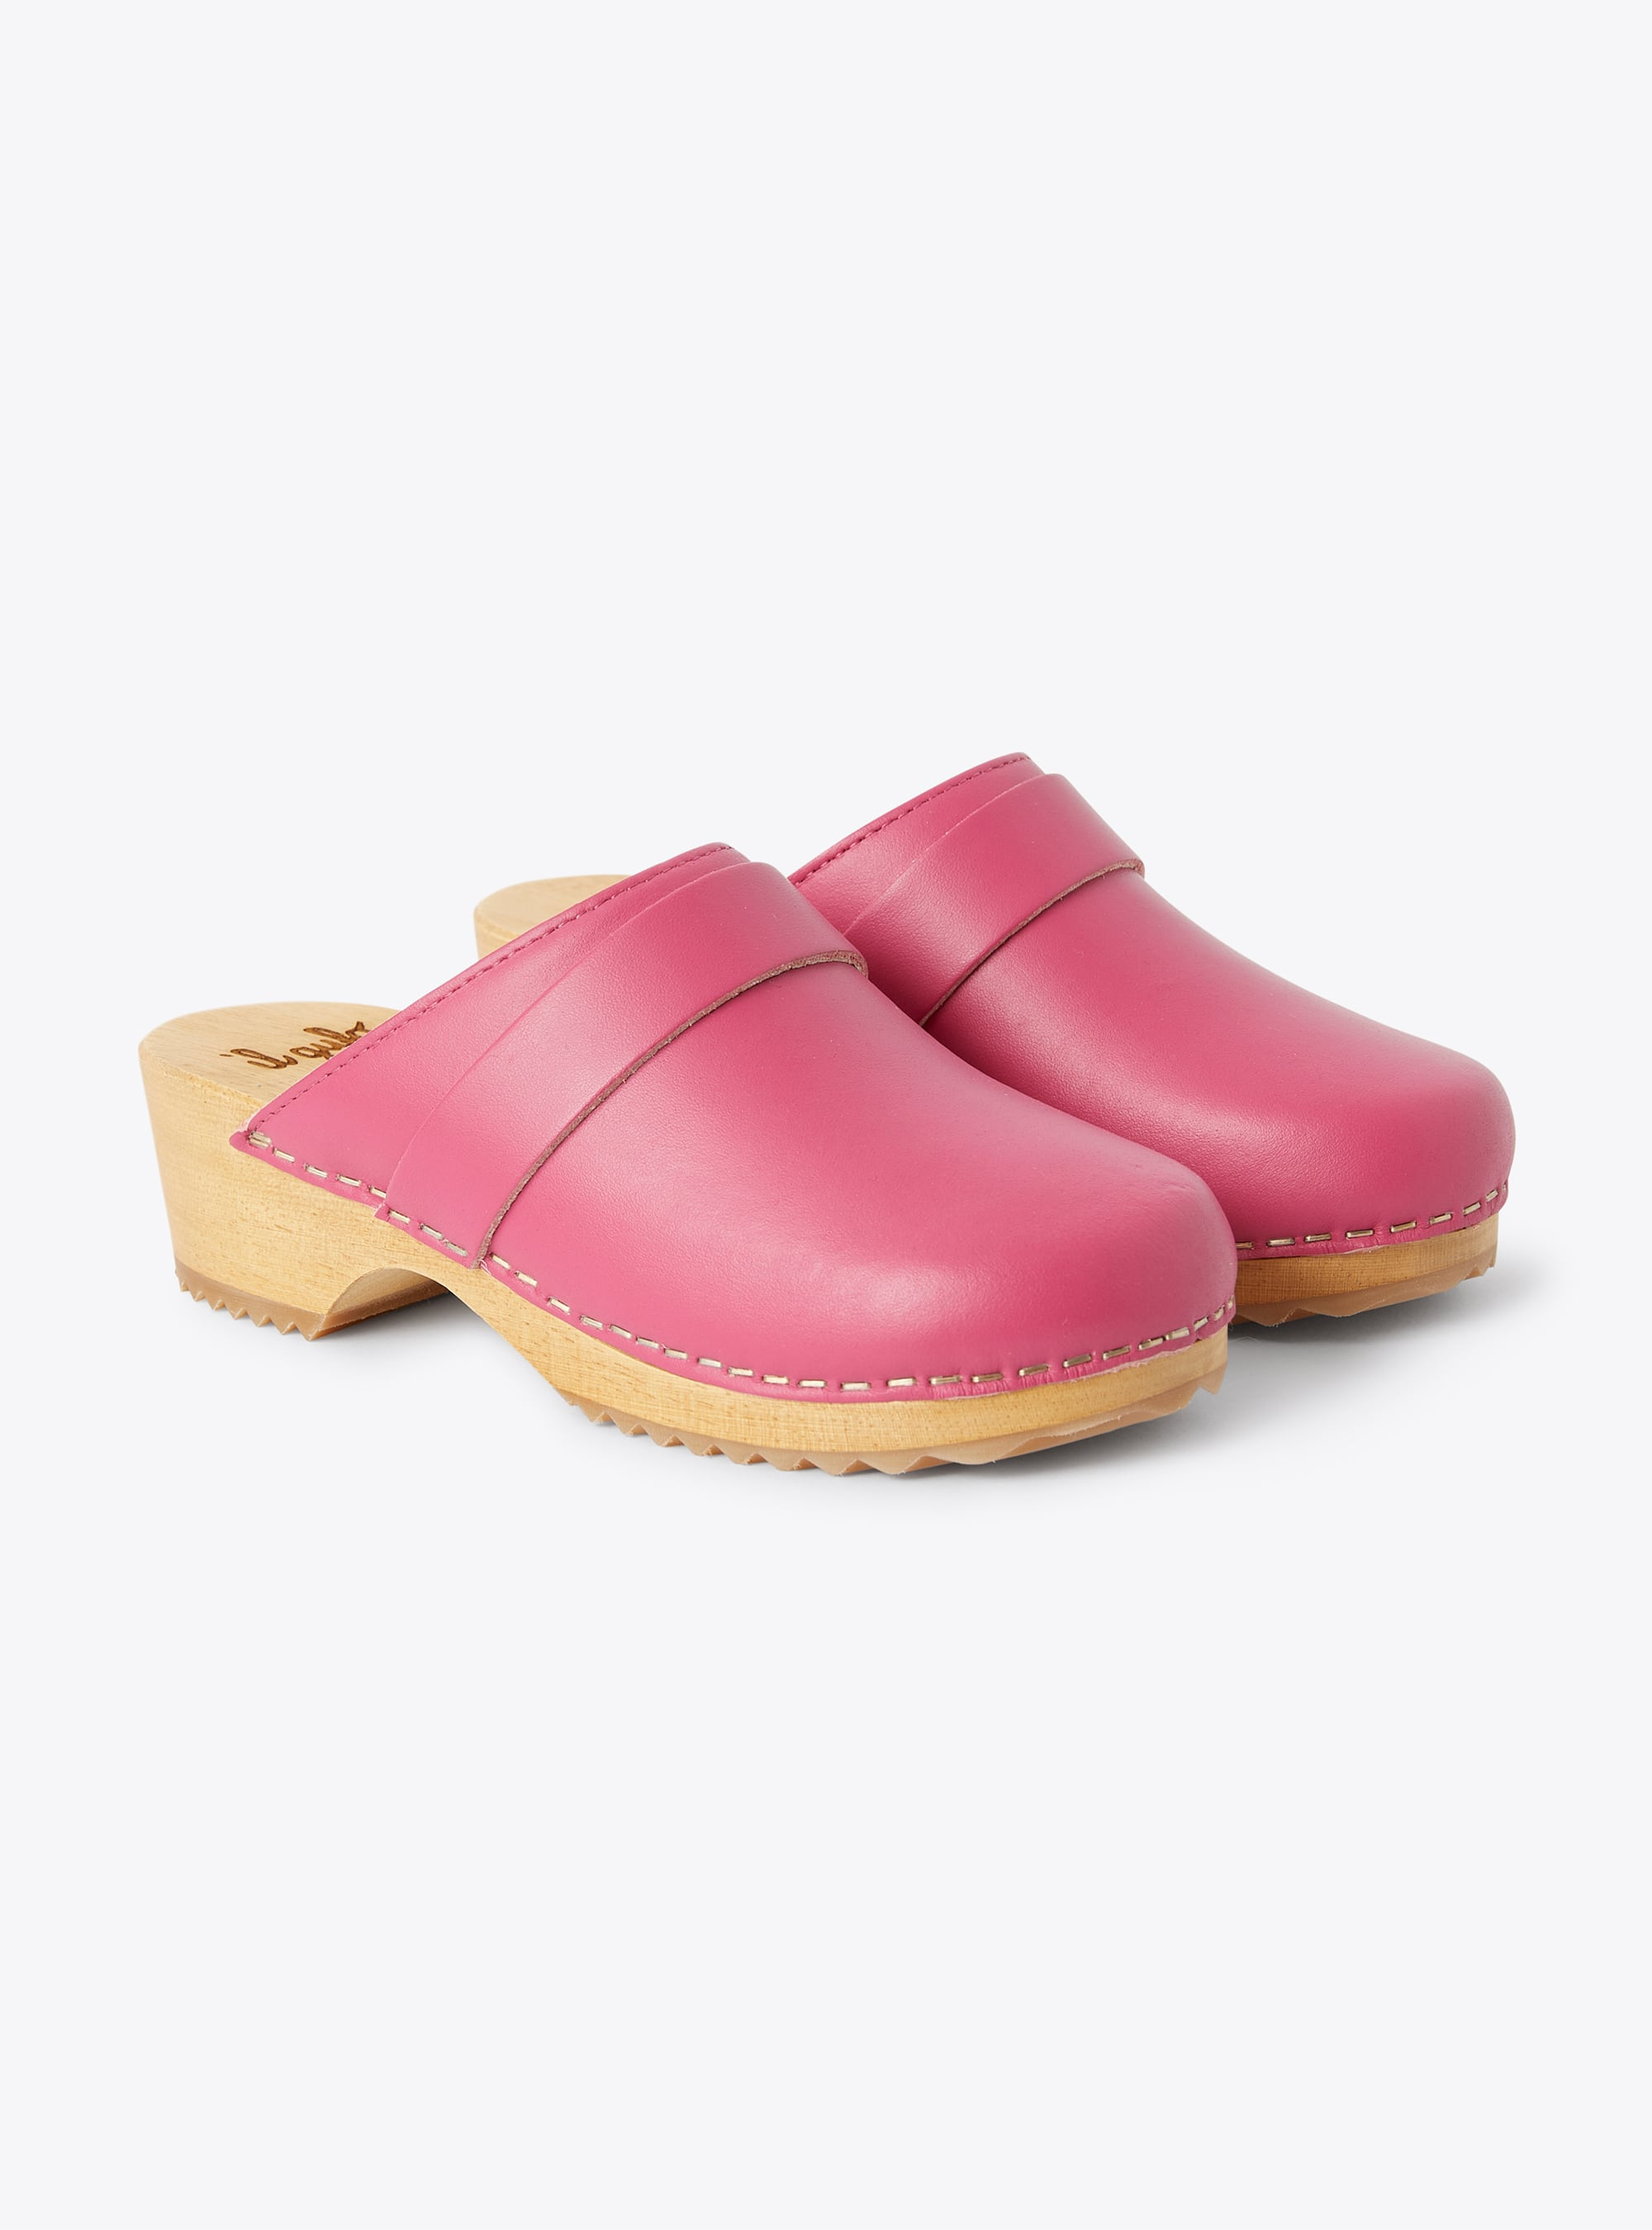 Clog in fuchsia-pink leather - Shoes - Il Gufo